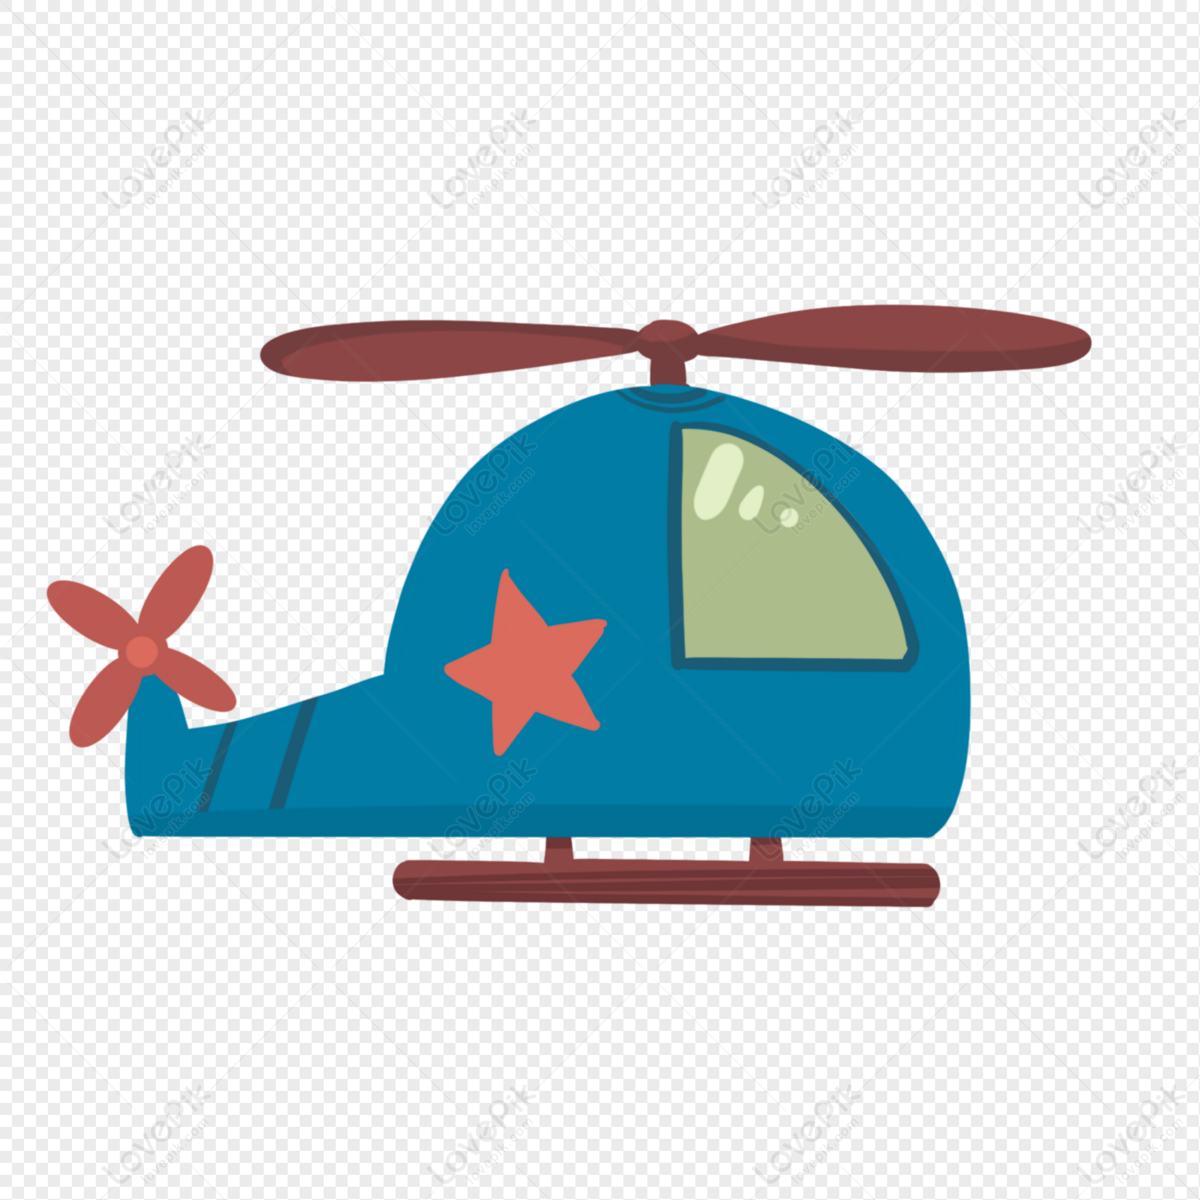 Cartoon Helicopter Toy PNG White Transparent And Clipart Image For Free  Download - Lovepik | 401425172